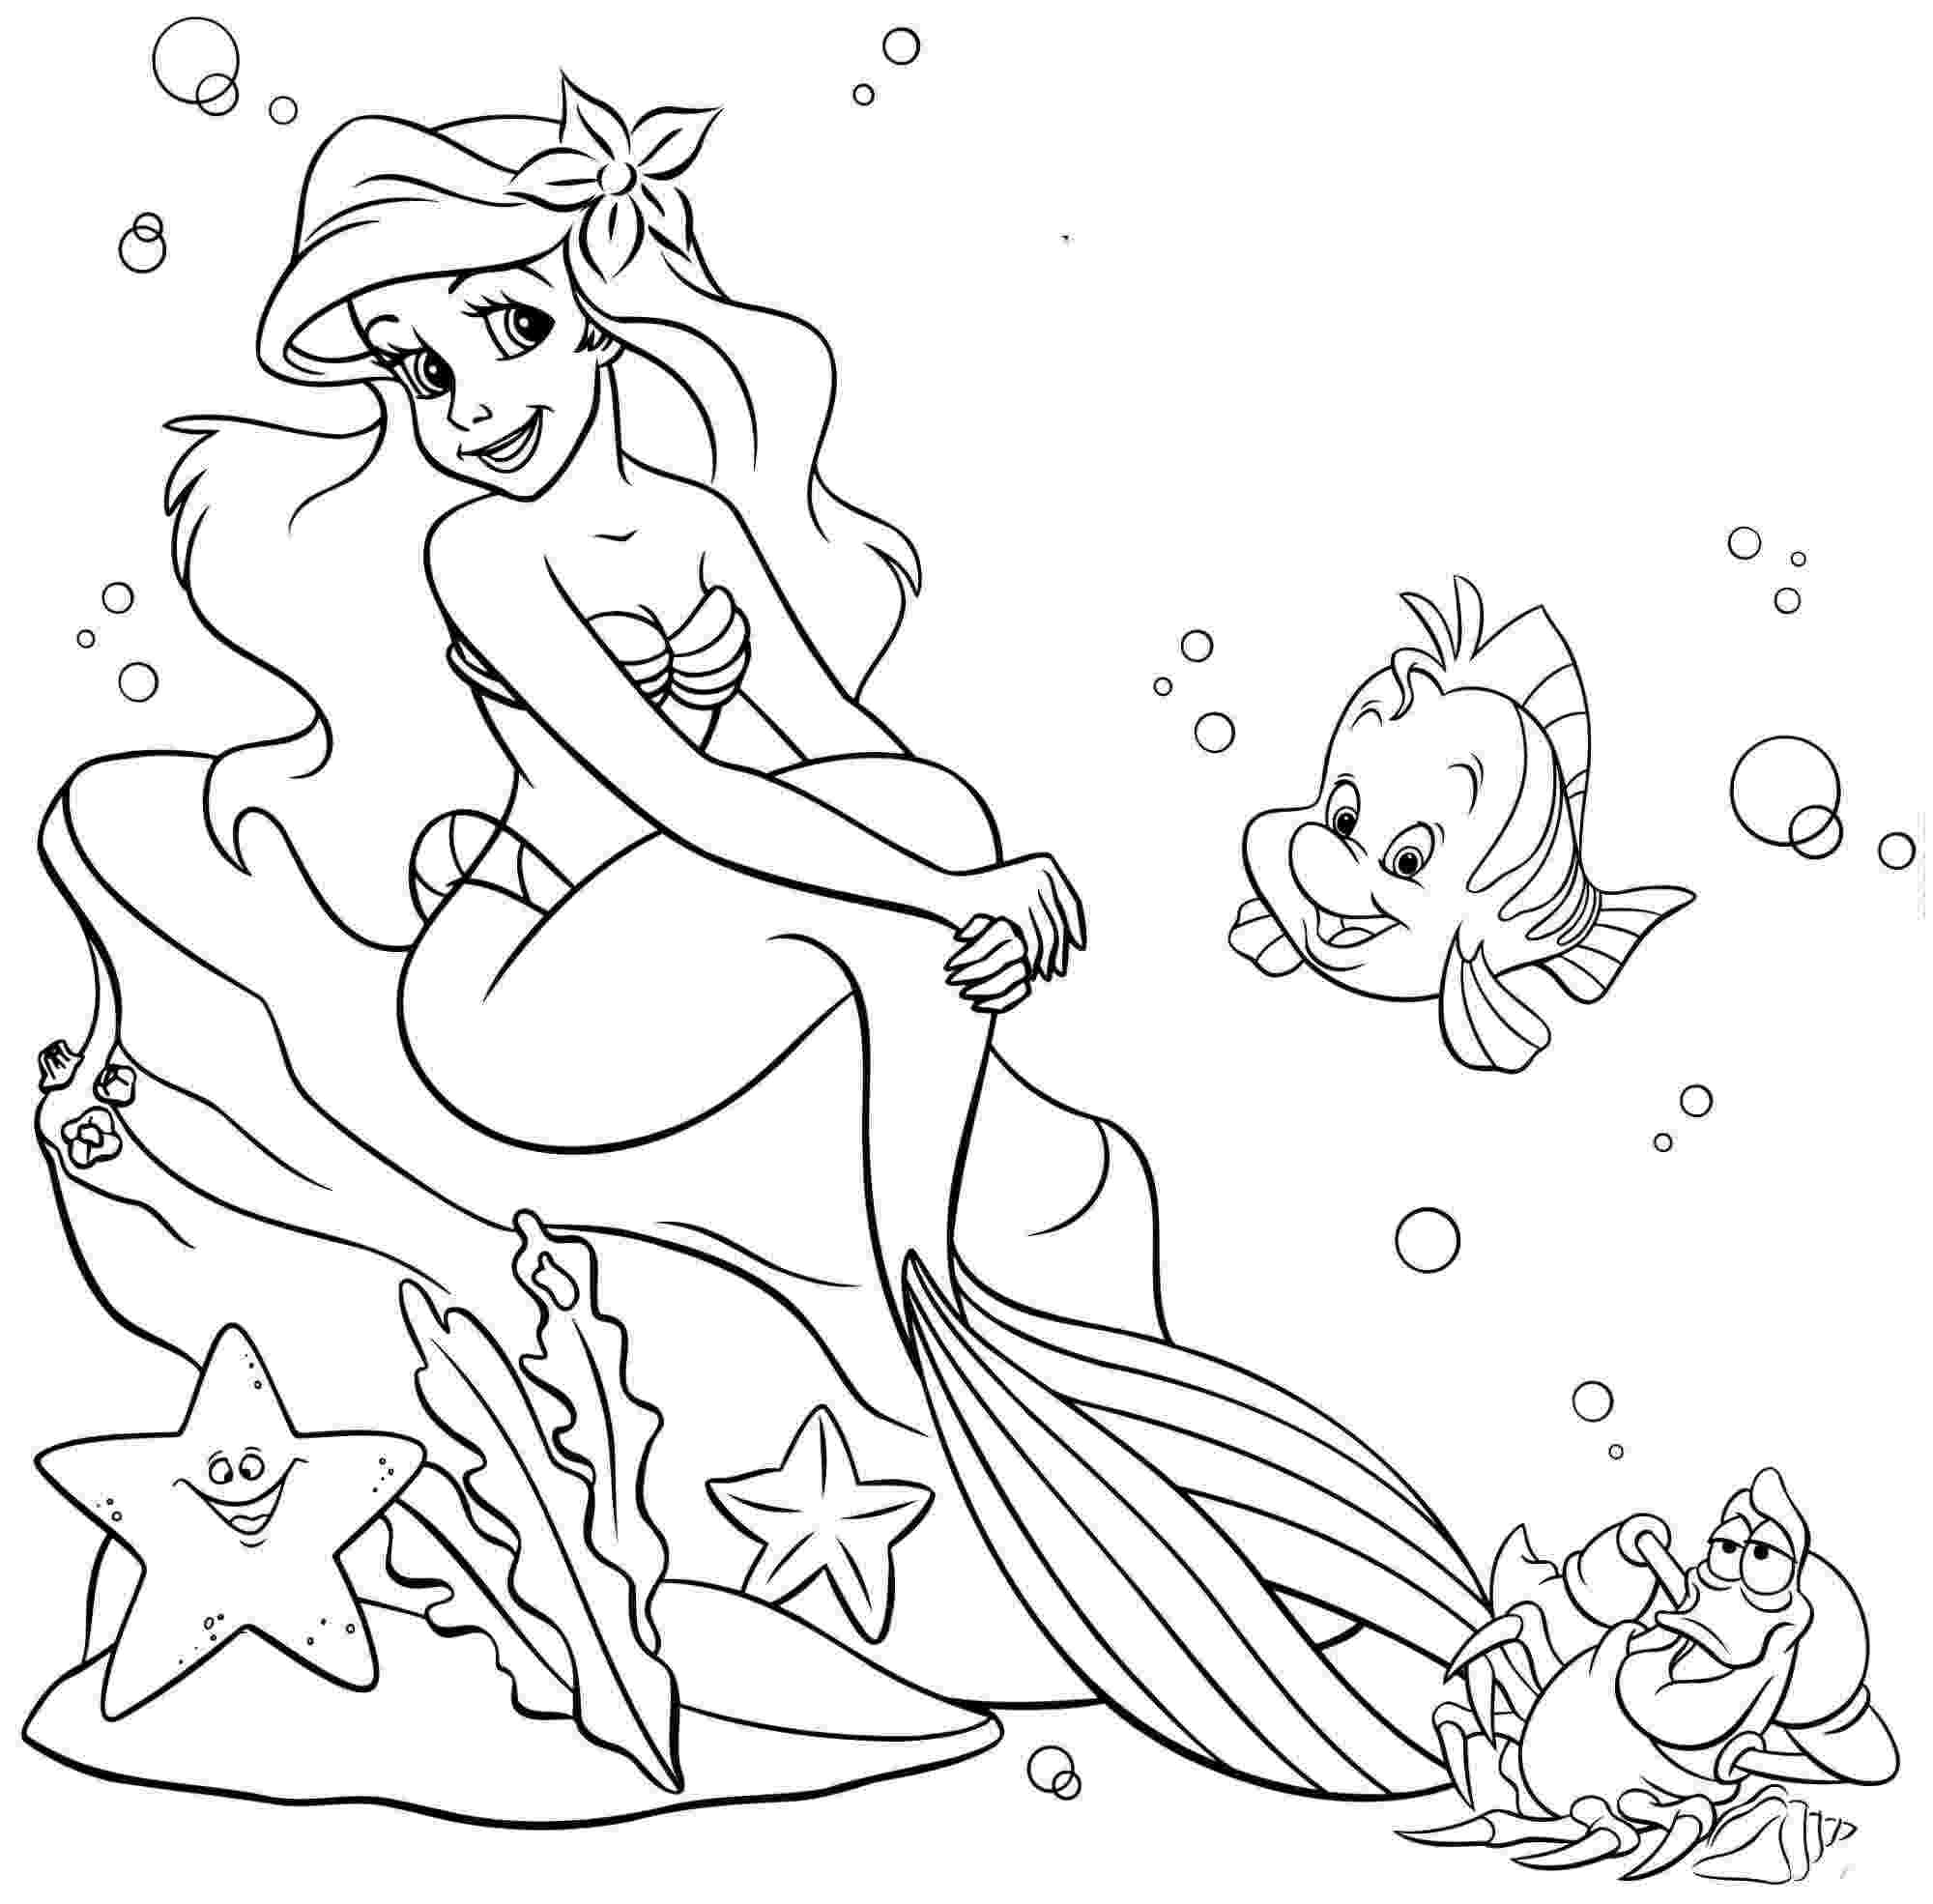 the little mermaid coloring page little mermaid coloring pages coloring pages little mermaid coloring page the 